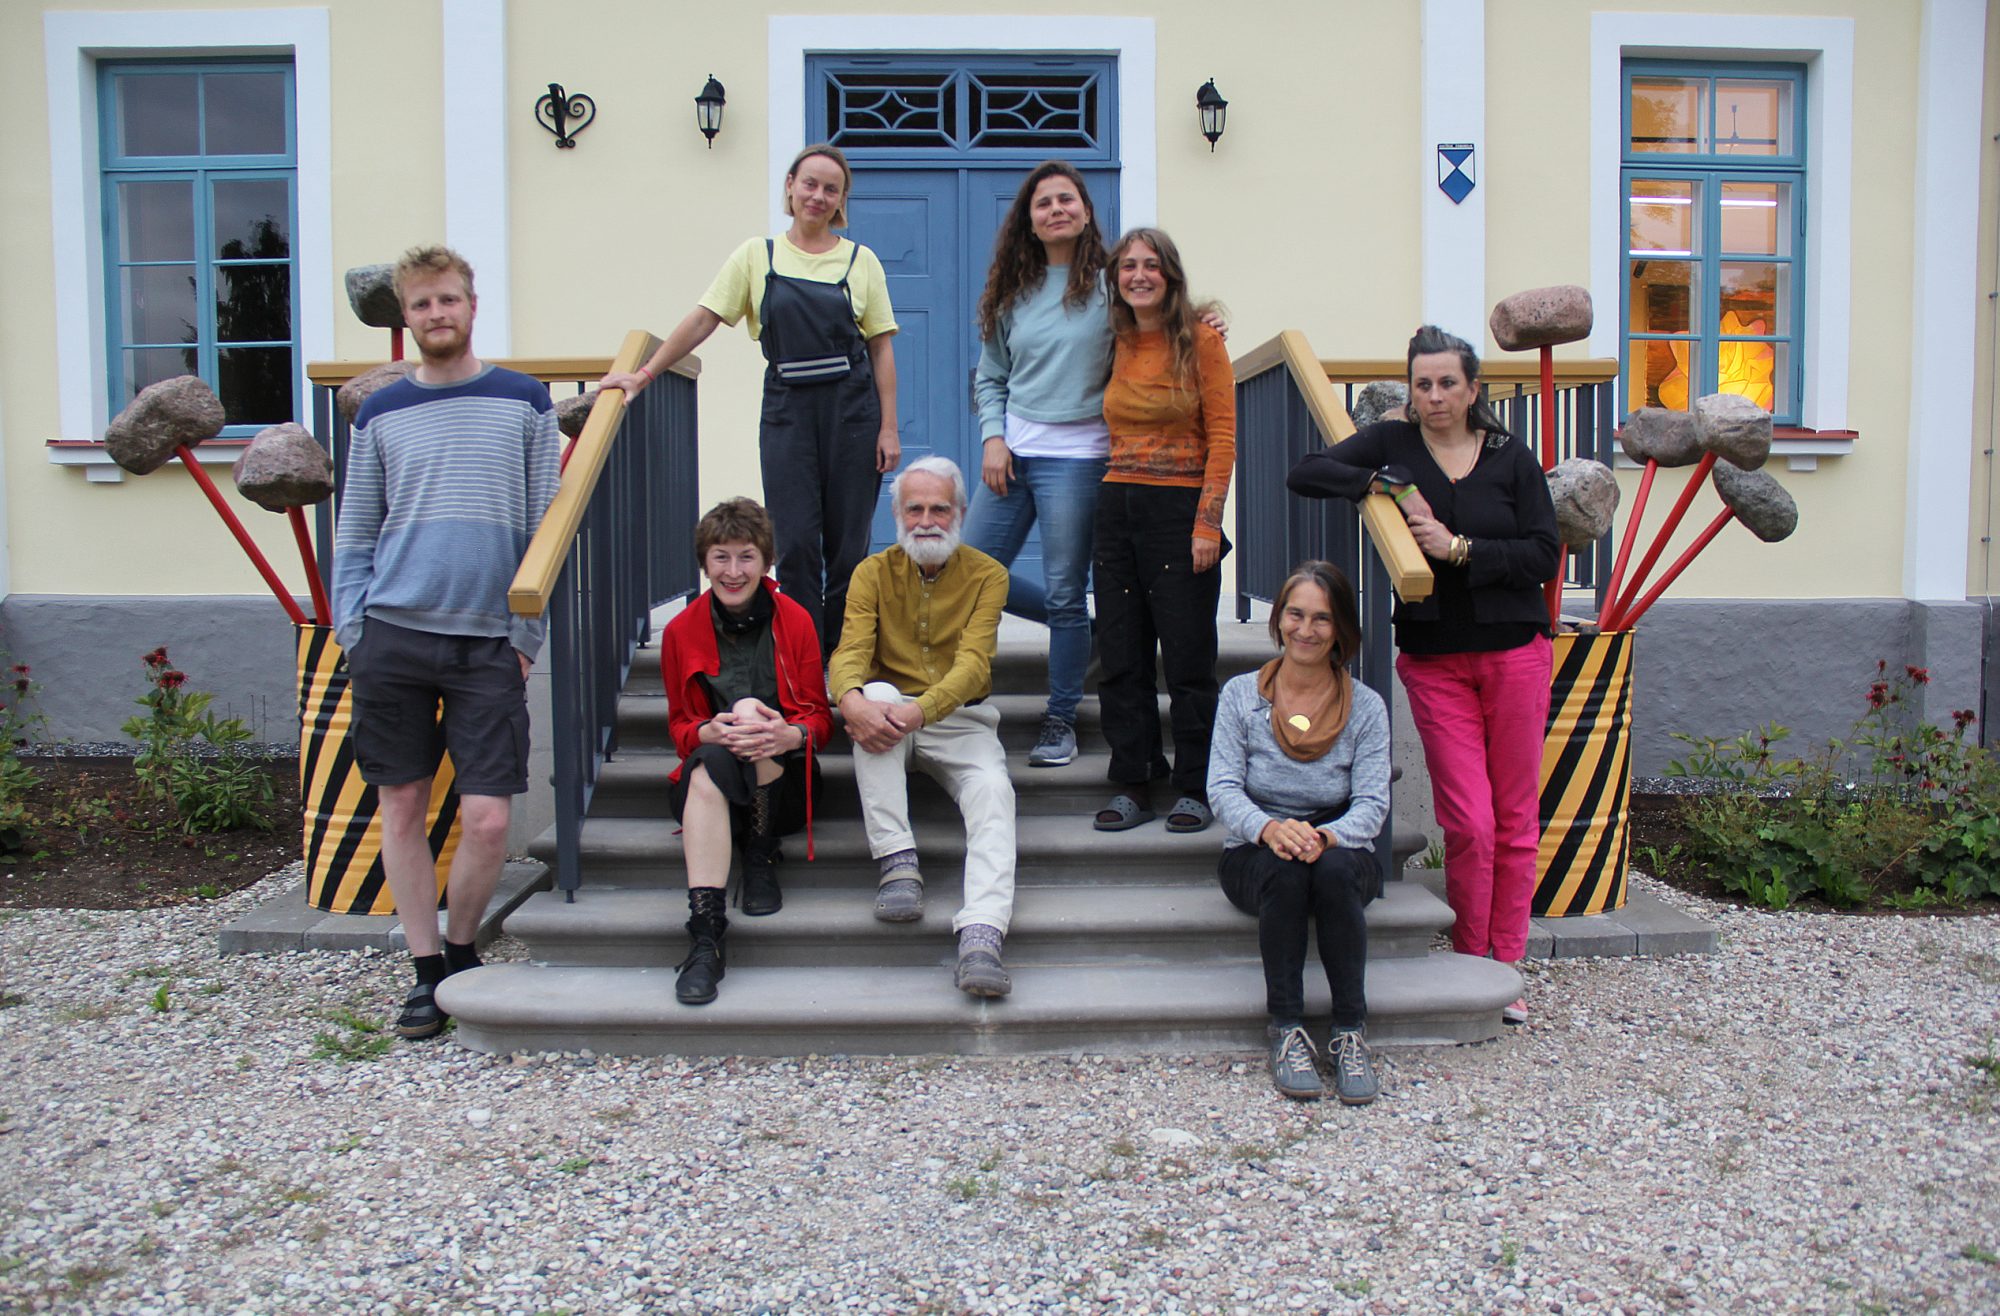 August at the Artists’ Residency